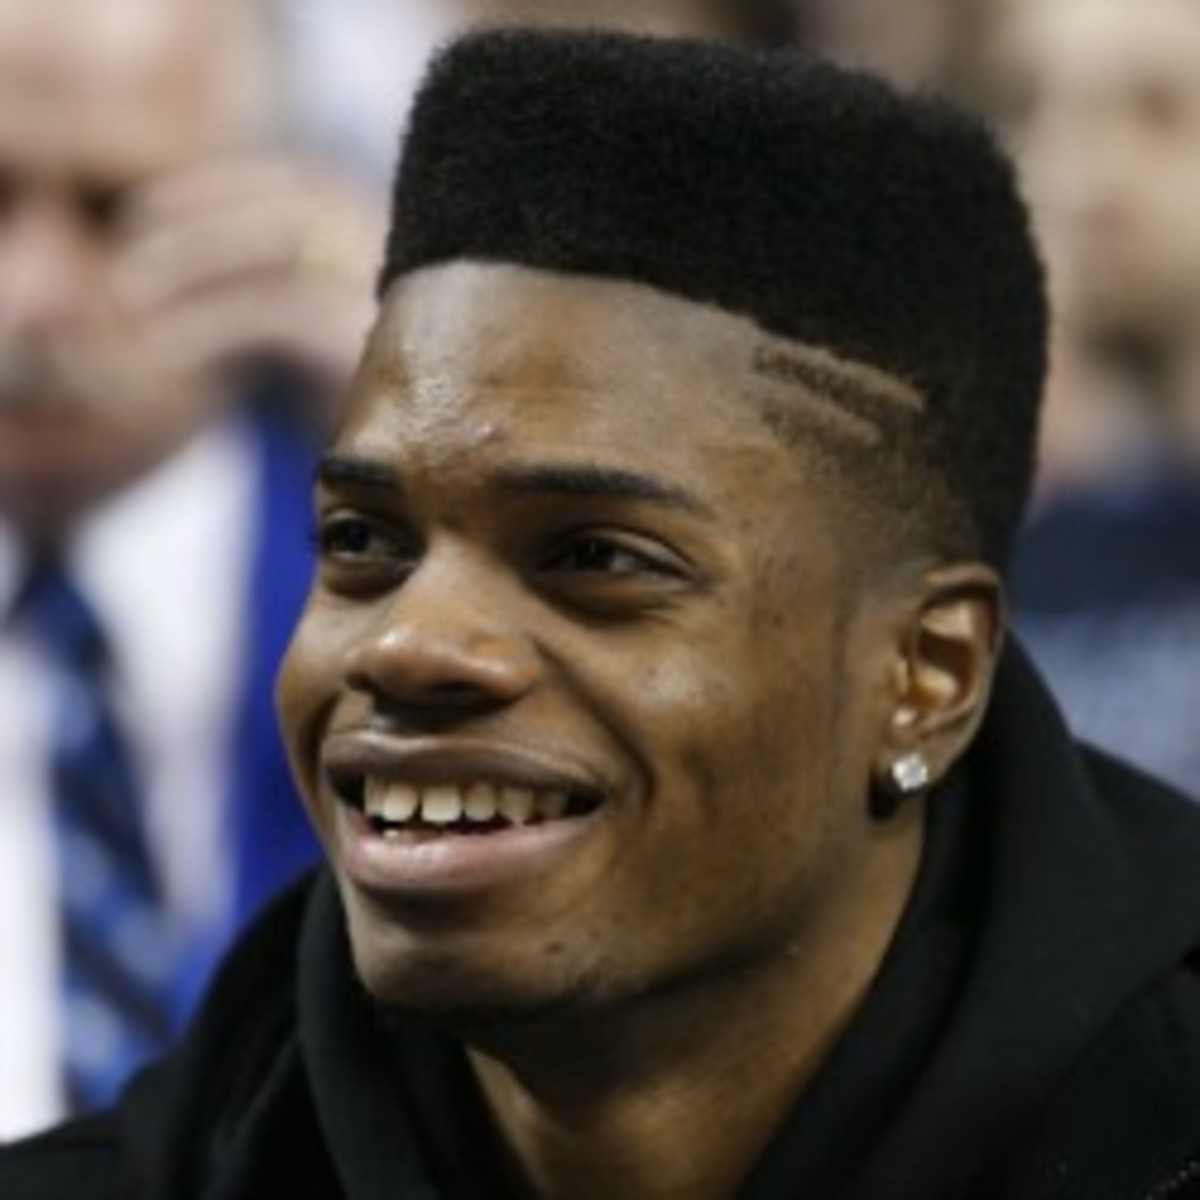 Nerlens Noel will enter the NBA draft as the projected No. 1 overall pick. (Lexington Herald-Leader/Getty Images)